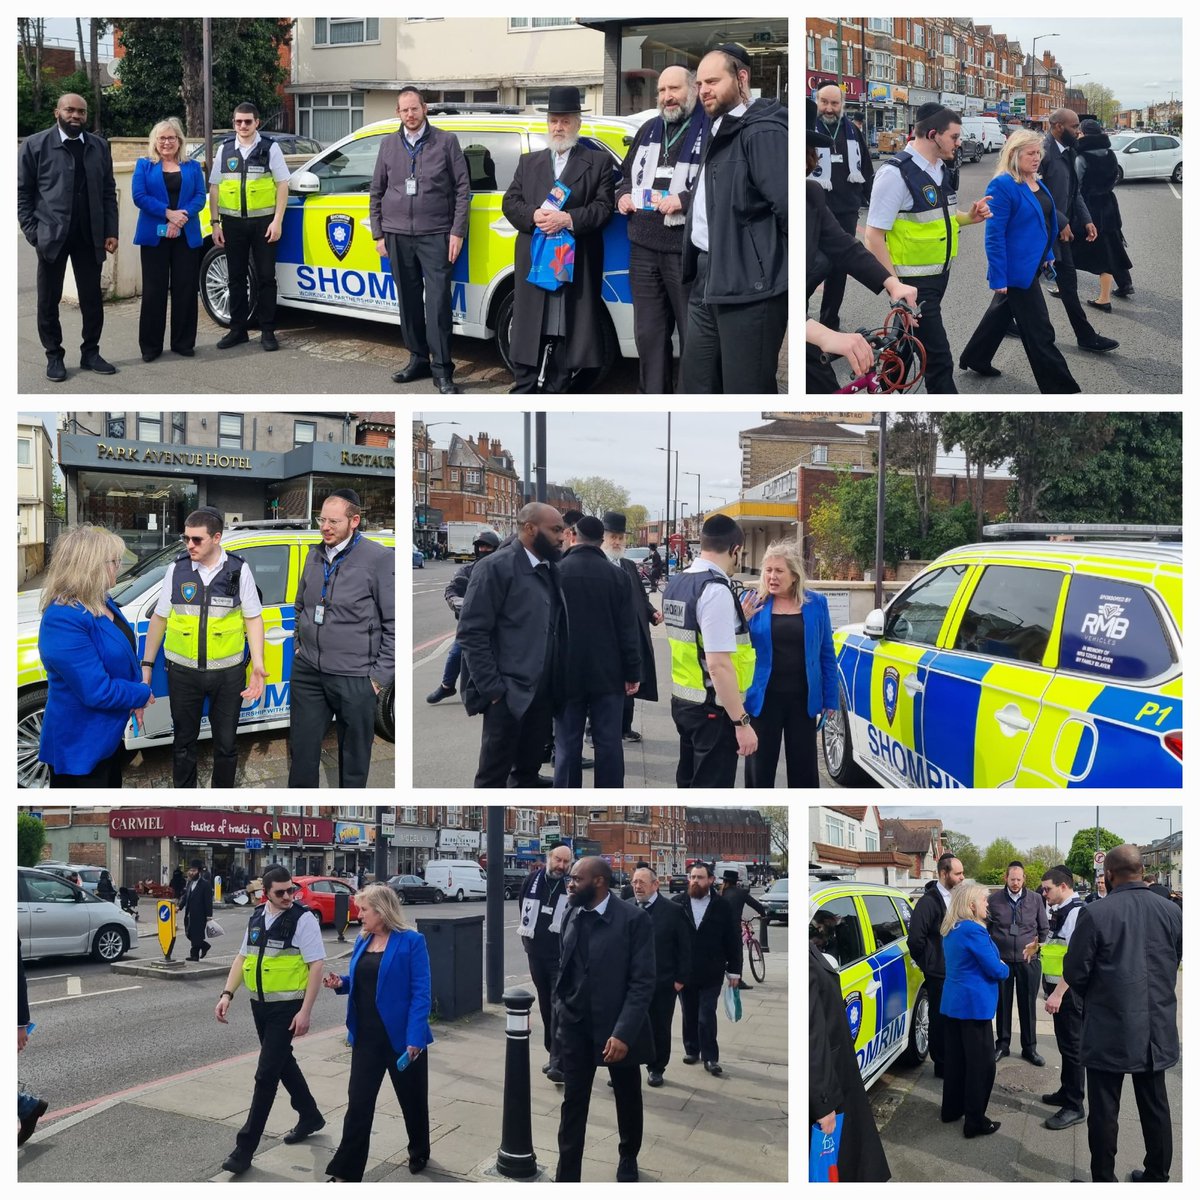 🎉 Shomrim were honoured by a visit from the Conservative Mayoral candidate Susan Hall AM. 🚶Our @Shomrim volunteers proudly gave @CouncillorSuzie a tour of the community in #StamfordHill, including visiting @Asado_Bistro & #Kosher shops. 🤝 She had an opportunity to meet many